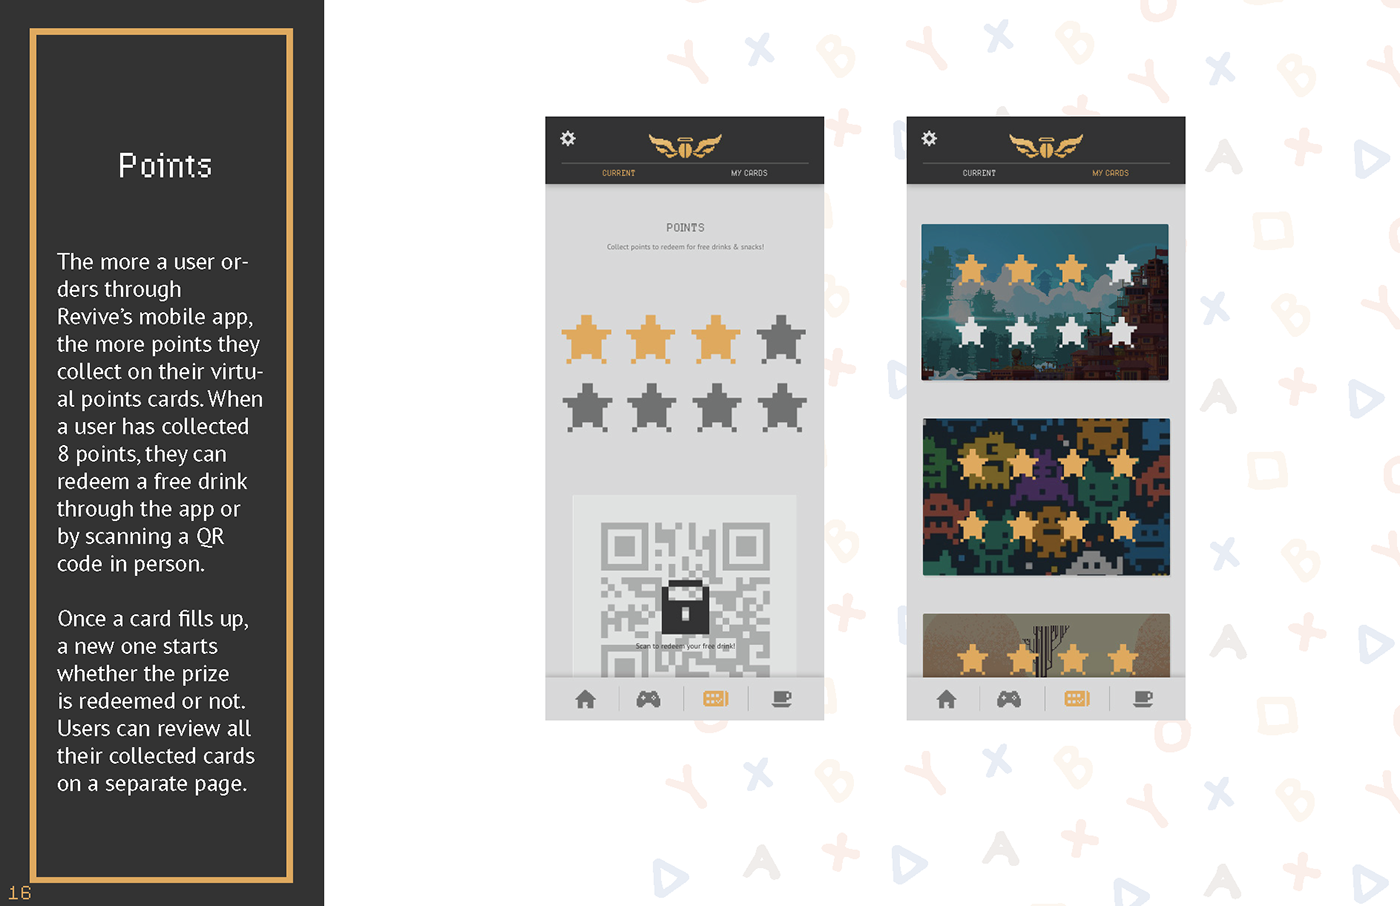 8-bit Coffee Video Games logo icons wireframes brand book mockups